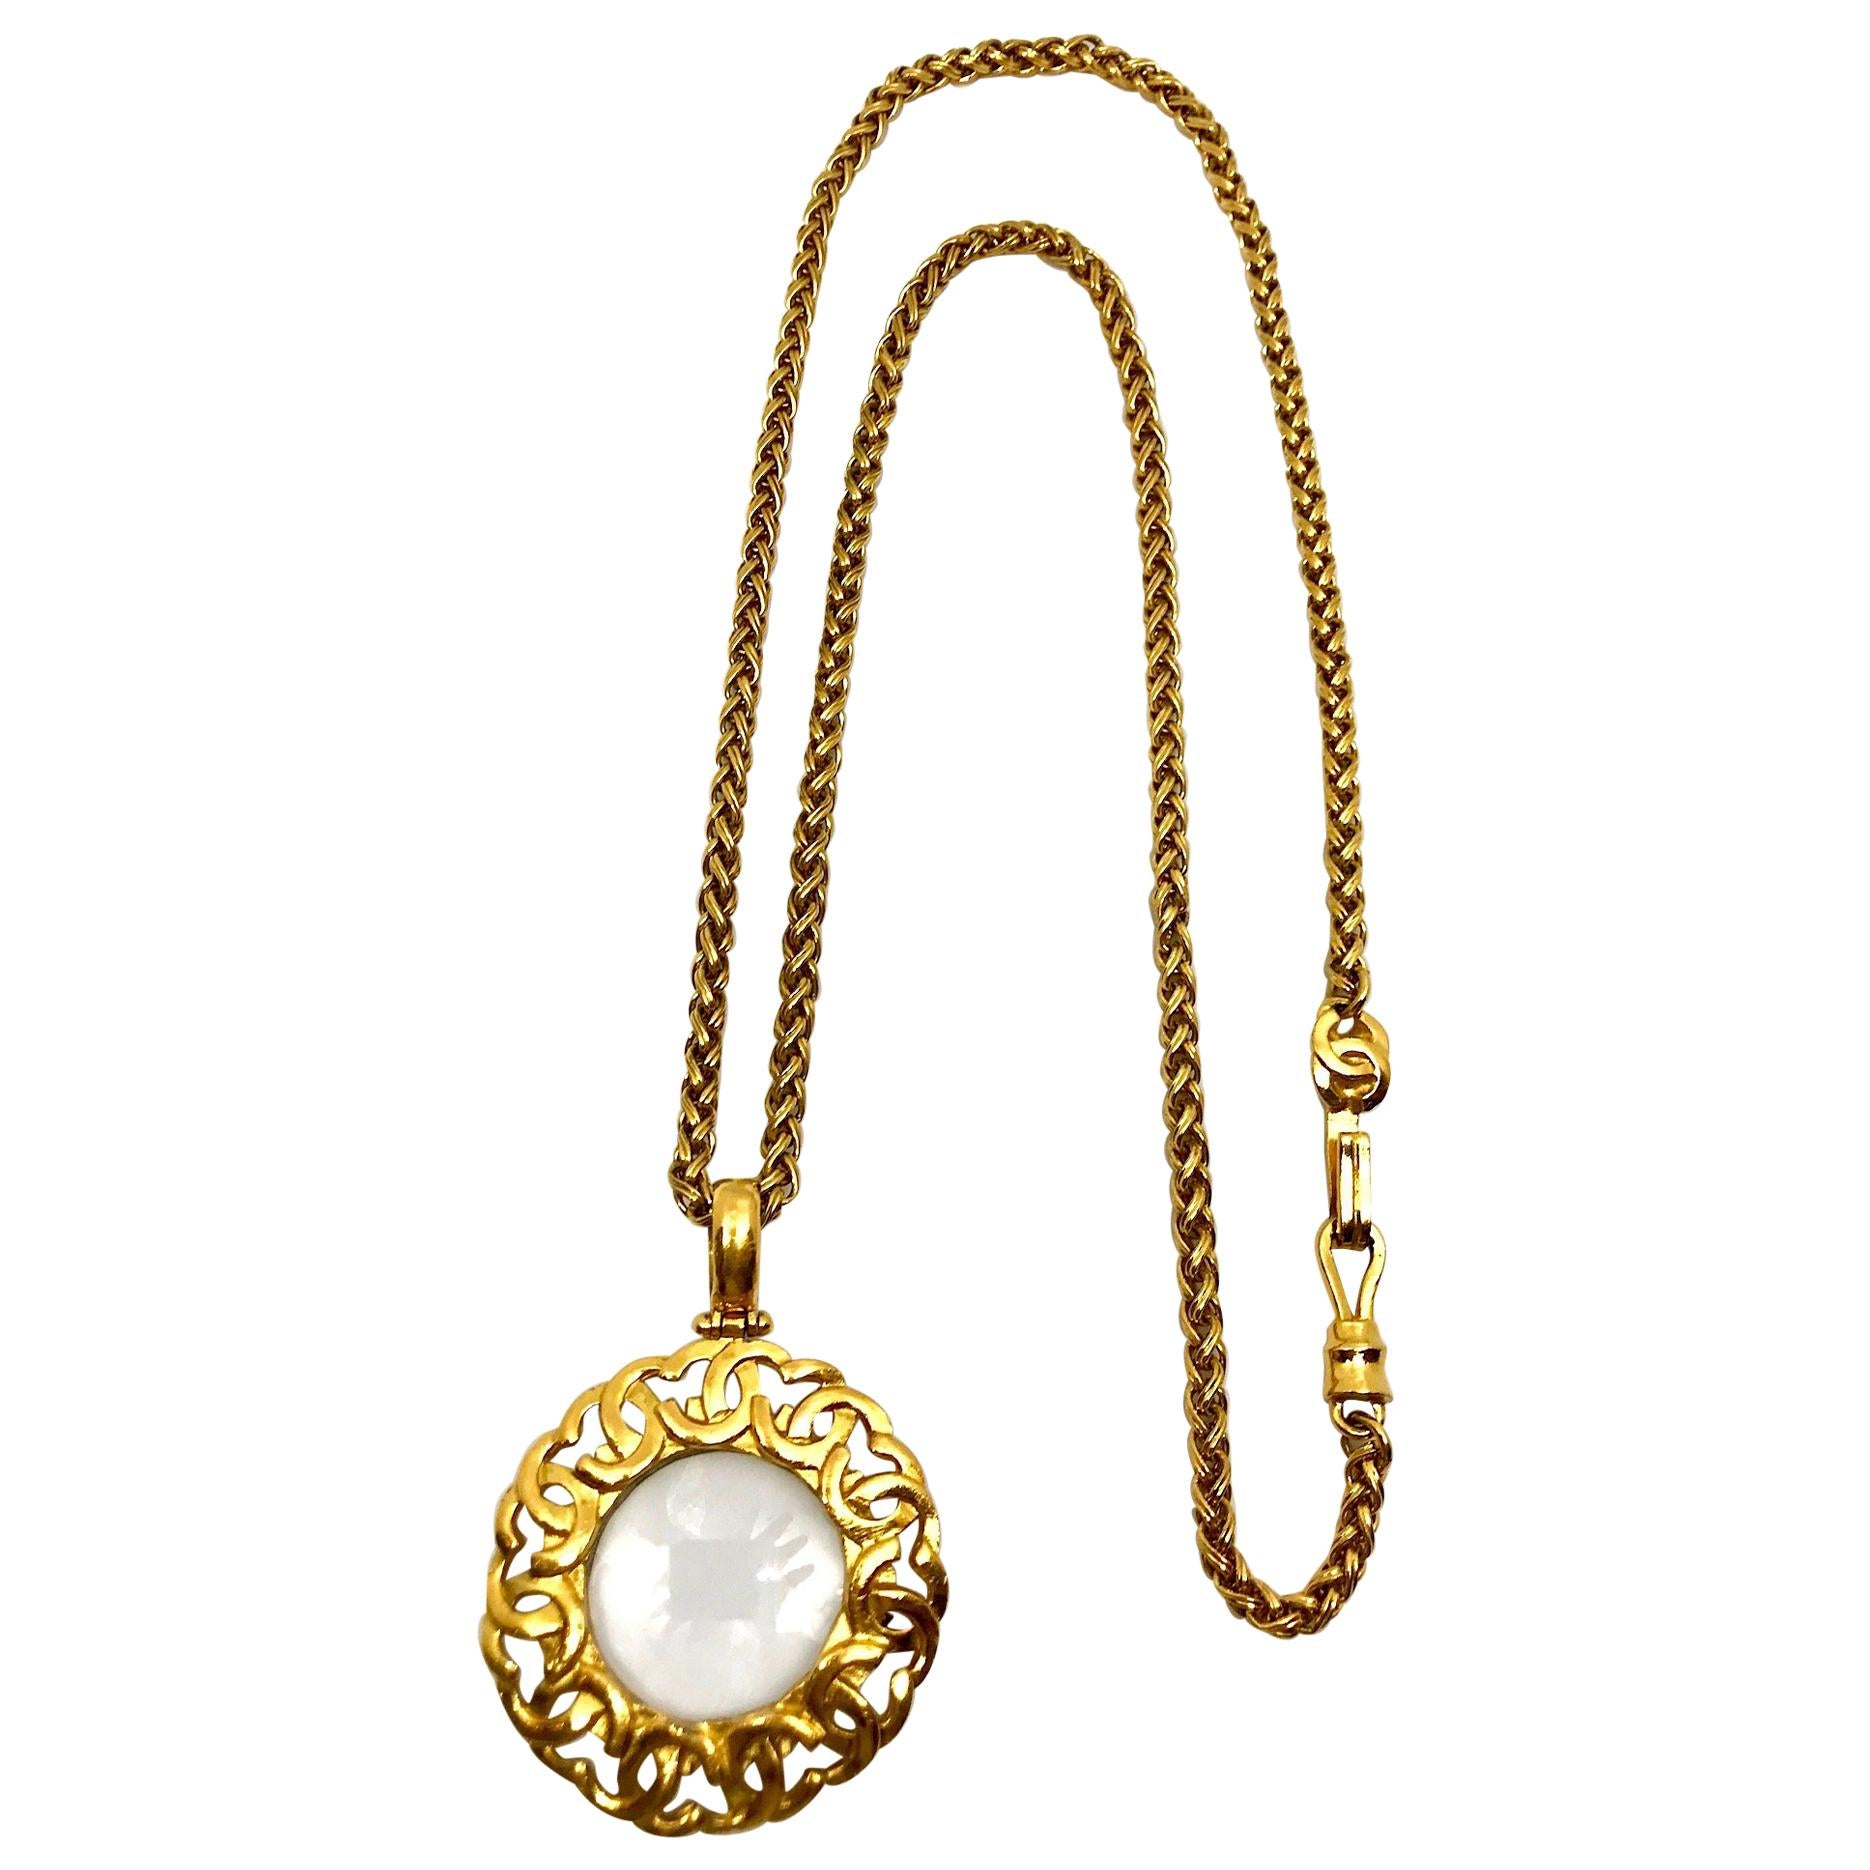 Chanel Magnifying Glass Pendant Necklace Autumn 1995 Collection